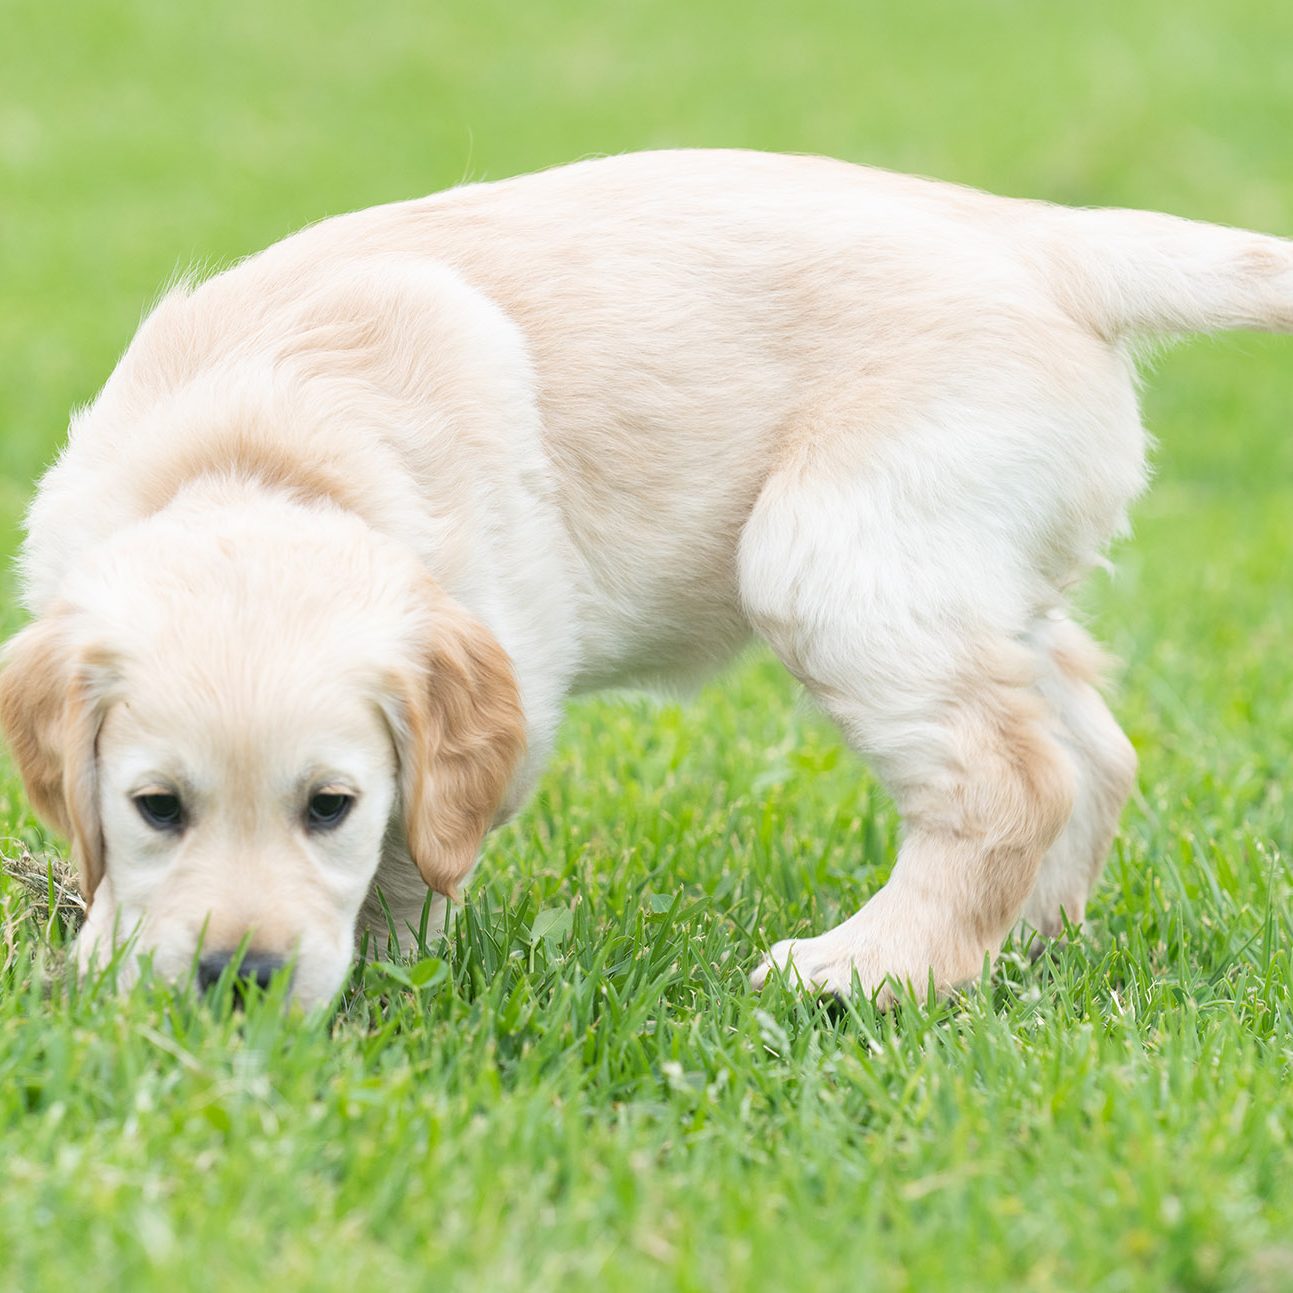 Guide Dog puppy sniffing grass